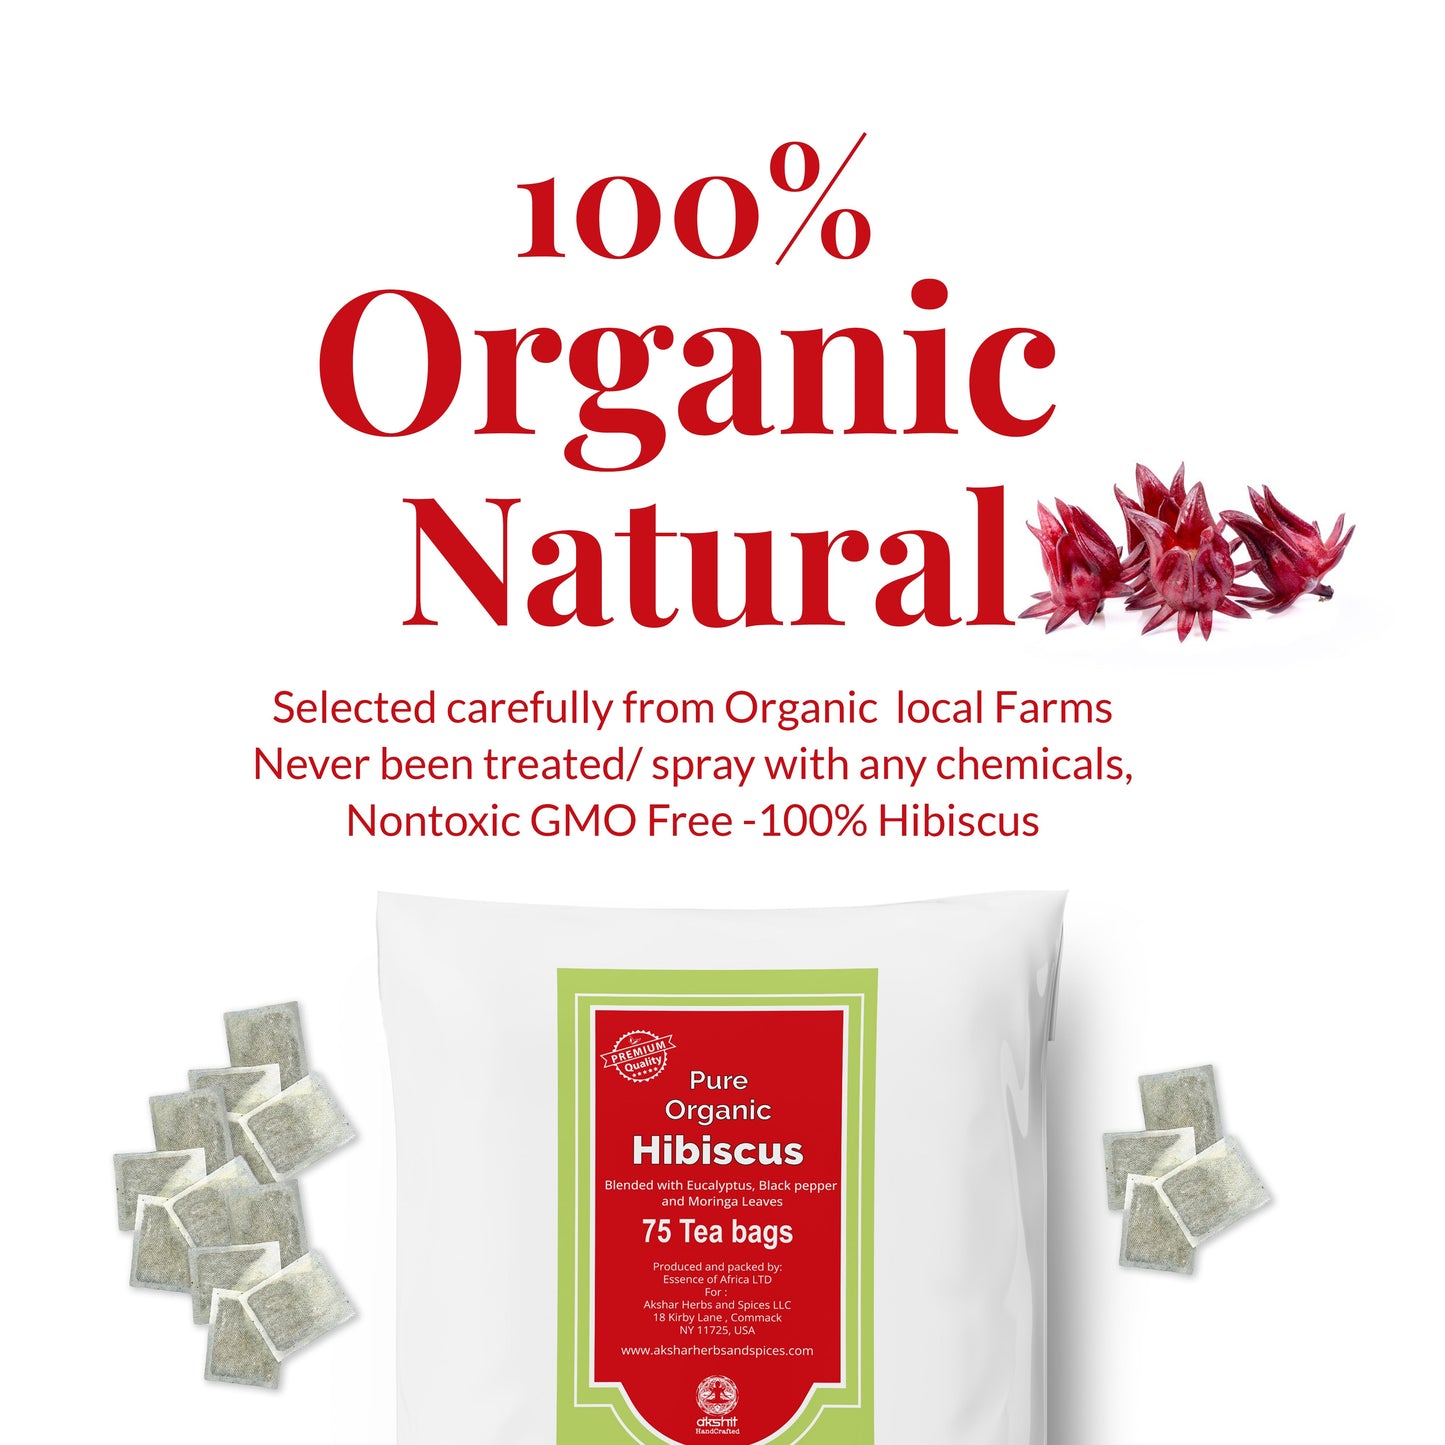 
                  
                    100% Organic Natural Selected carefully from Organic Local Farms Never been treared/ spray with any chemicals non toxic GMO free - 100% hibiscus
                  
                